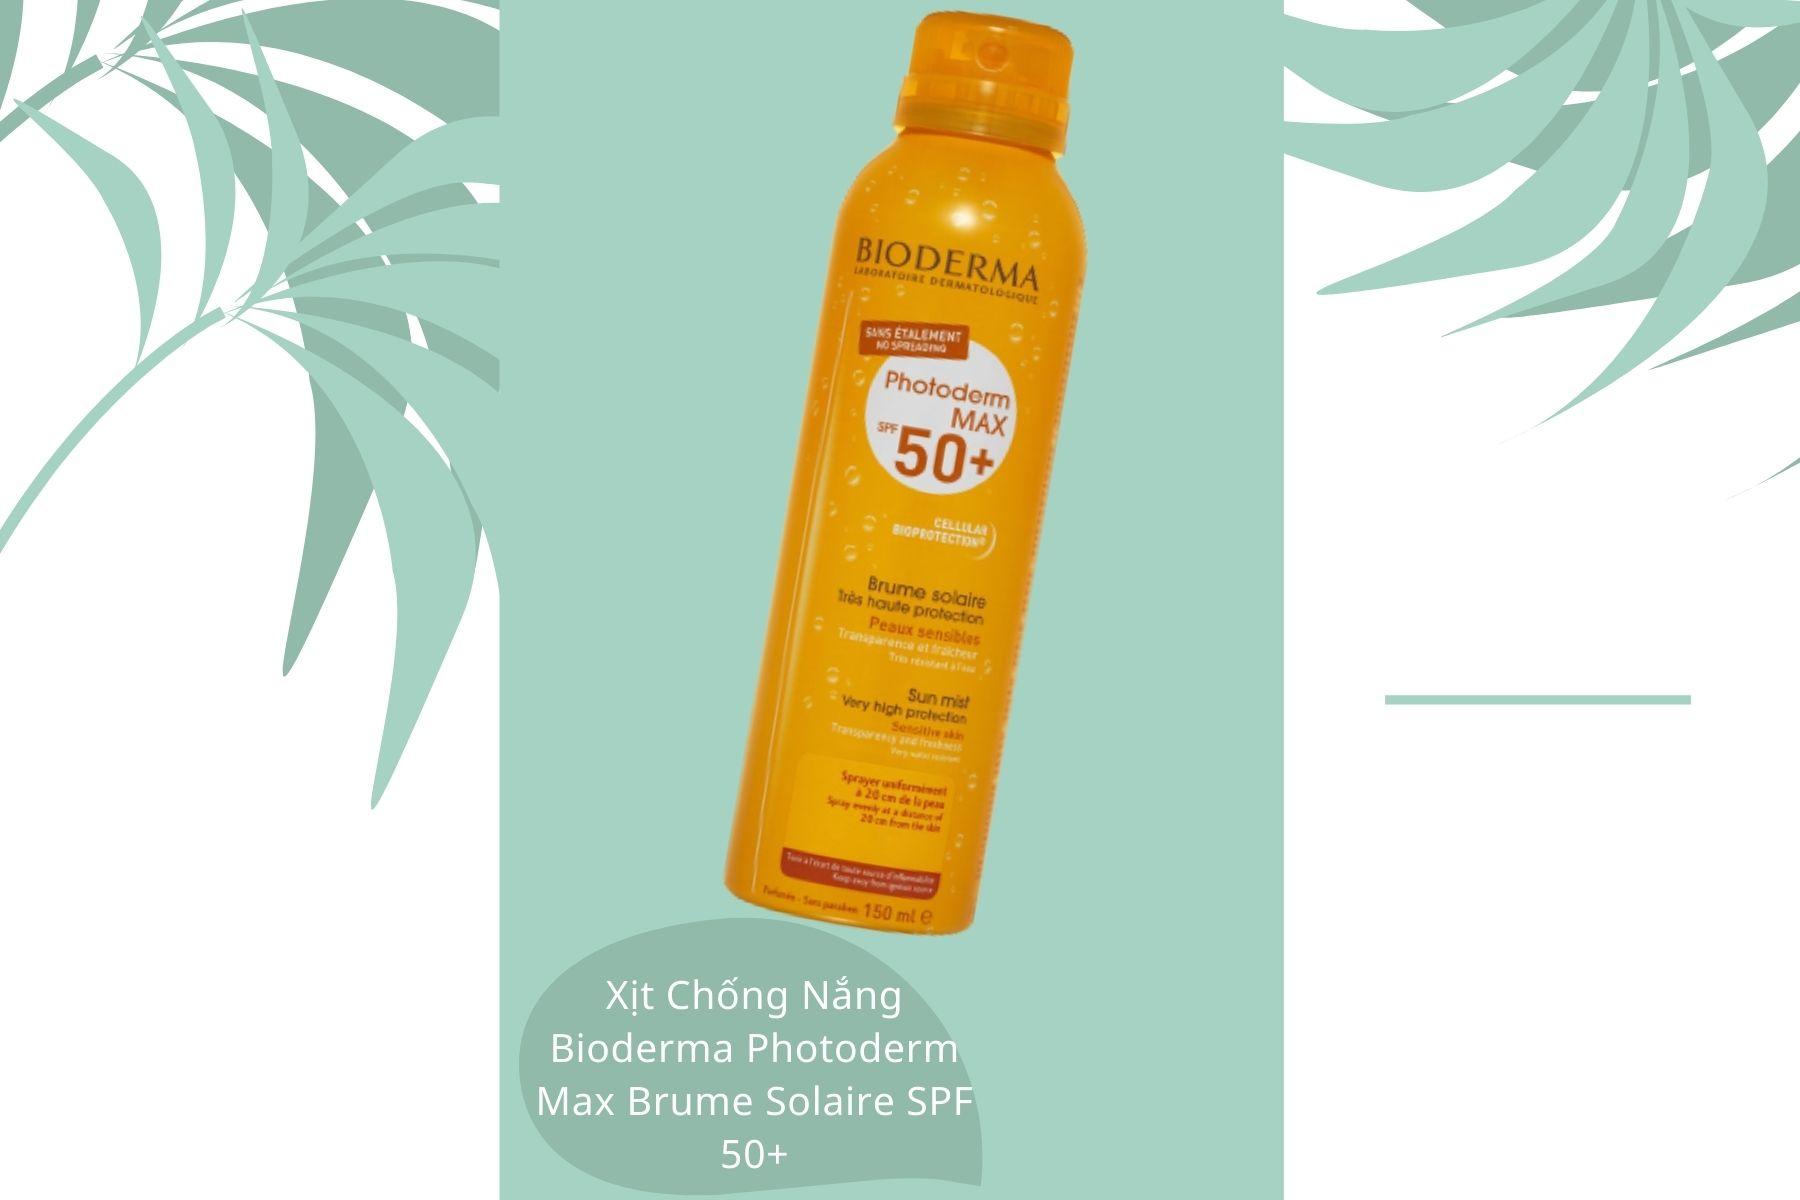 Xịt Chống Nắng Bioderma Photoderm Max Brume Solaire SPF 50+